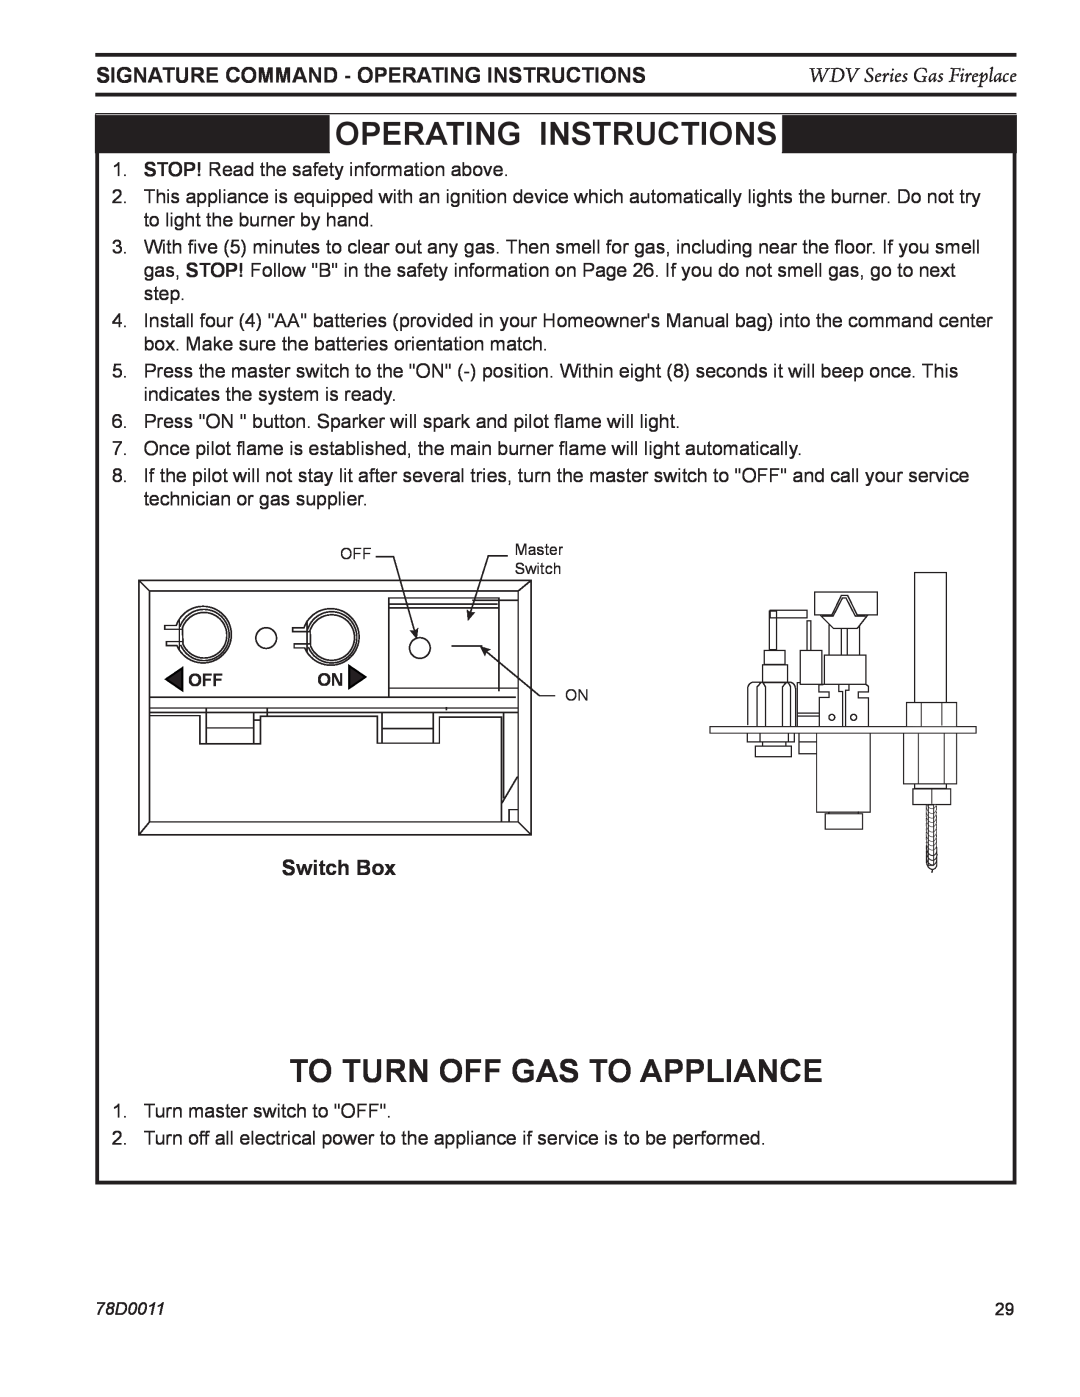 Monessen Hearth WDV500 manual OPERATing INSTRUCTIONS, To Turn Off Gas To Appliance, Switch Box 